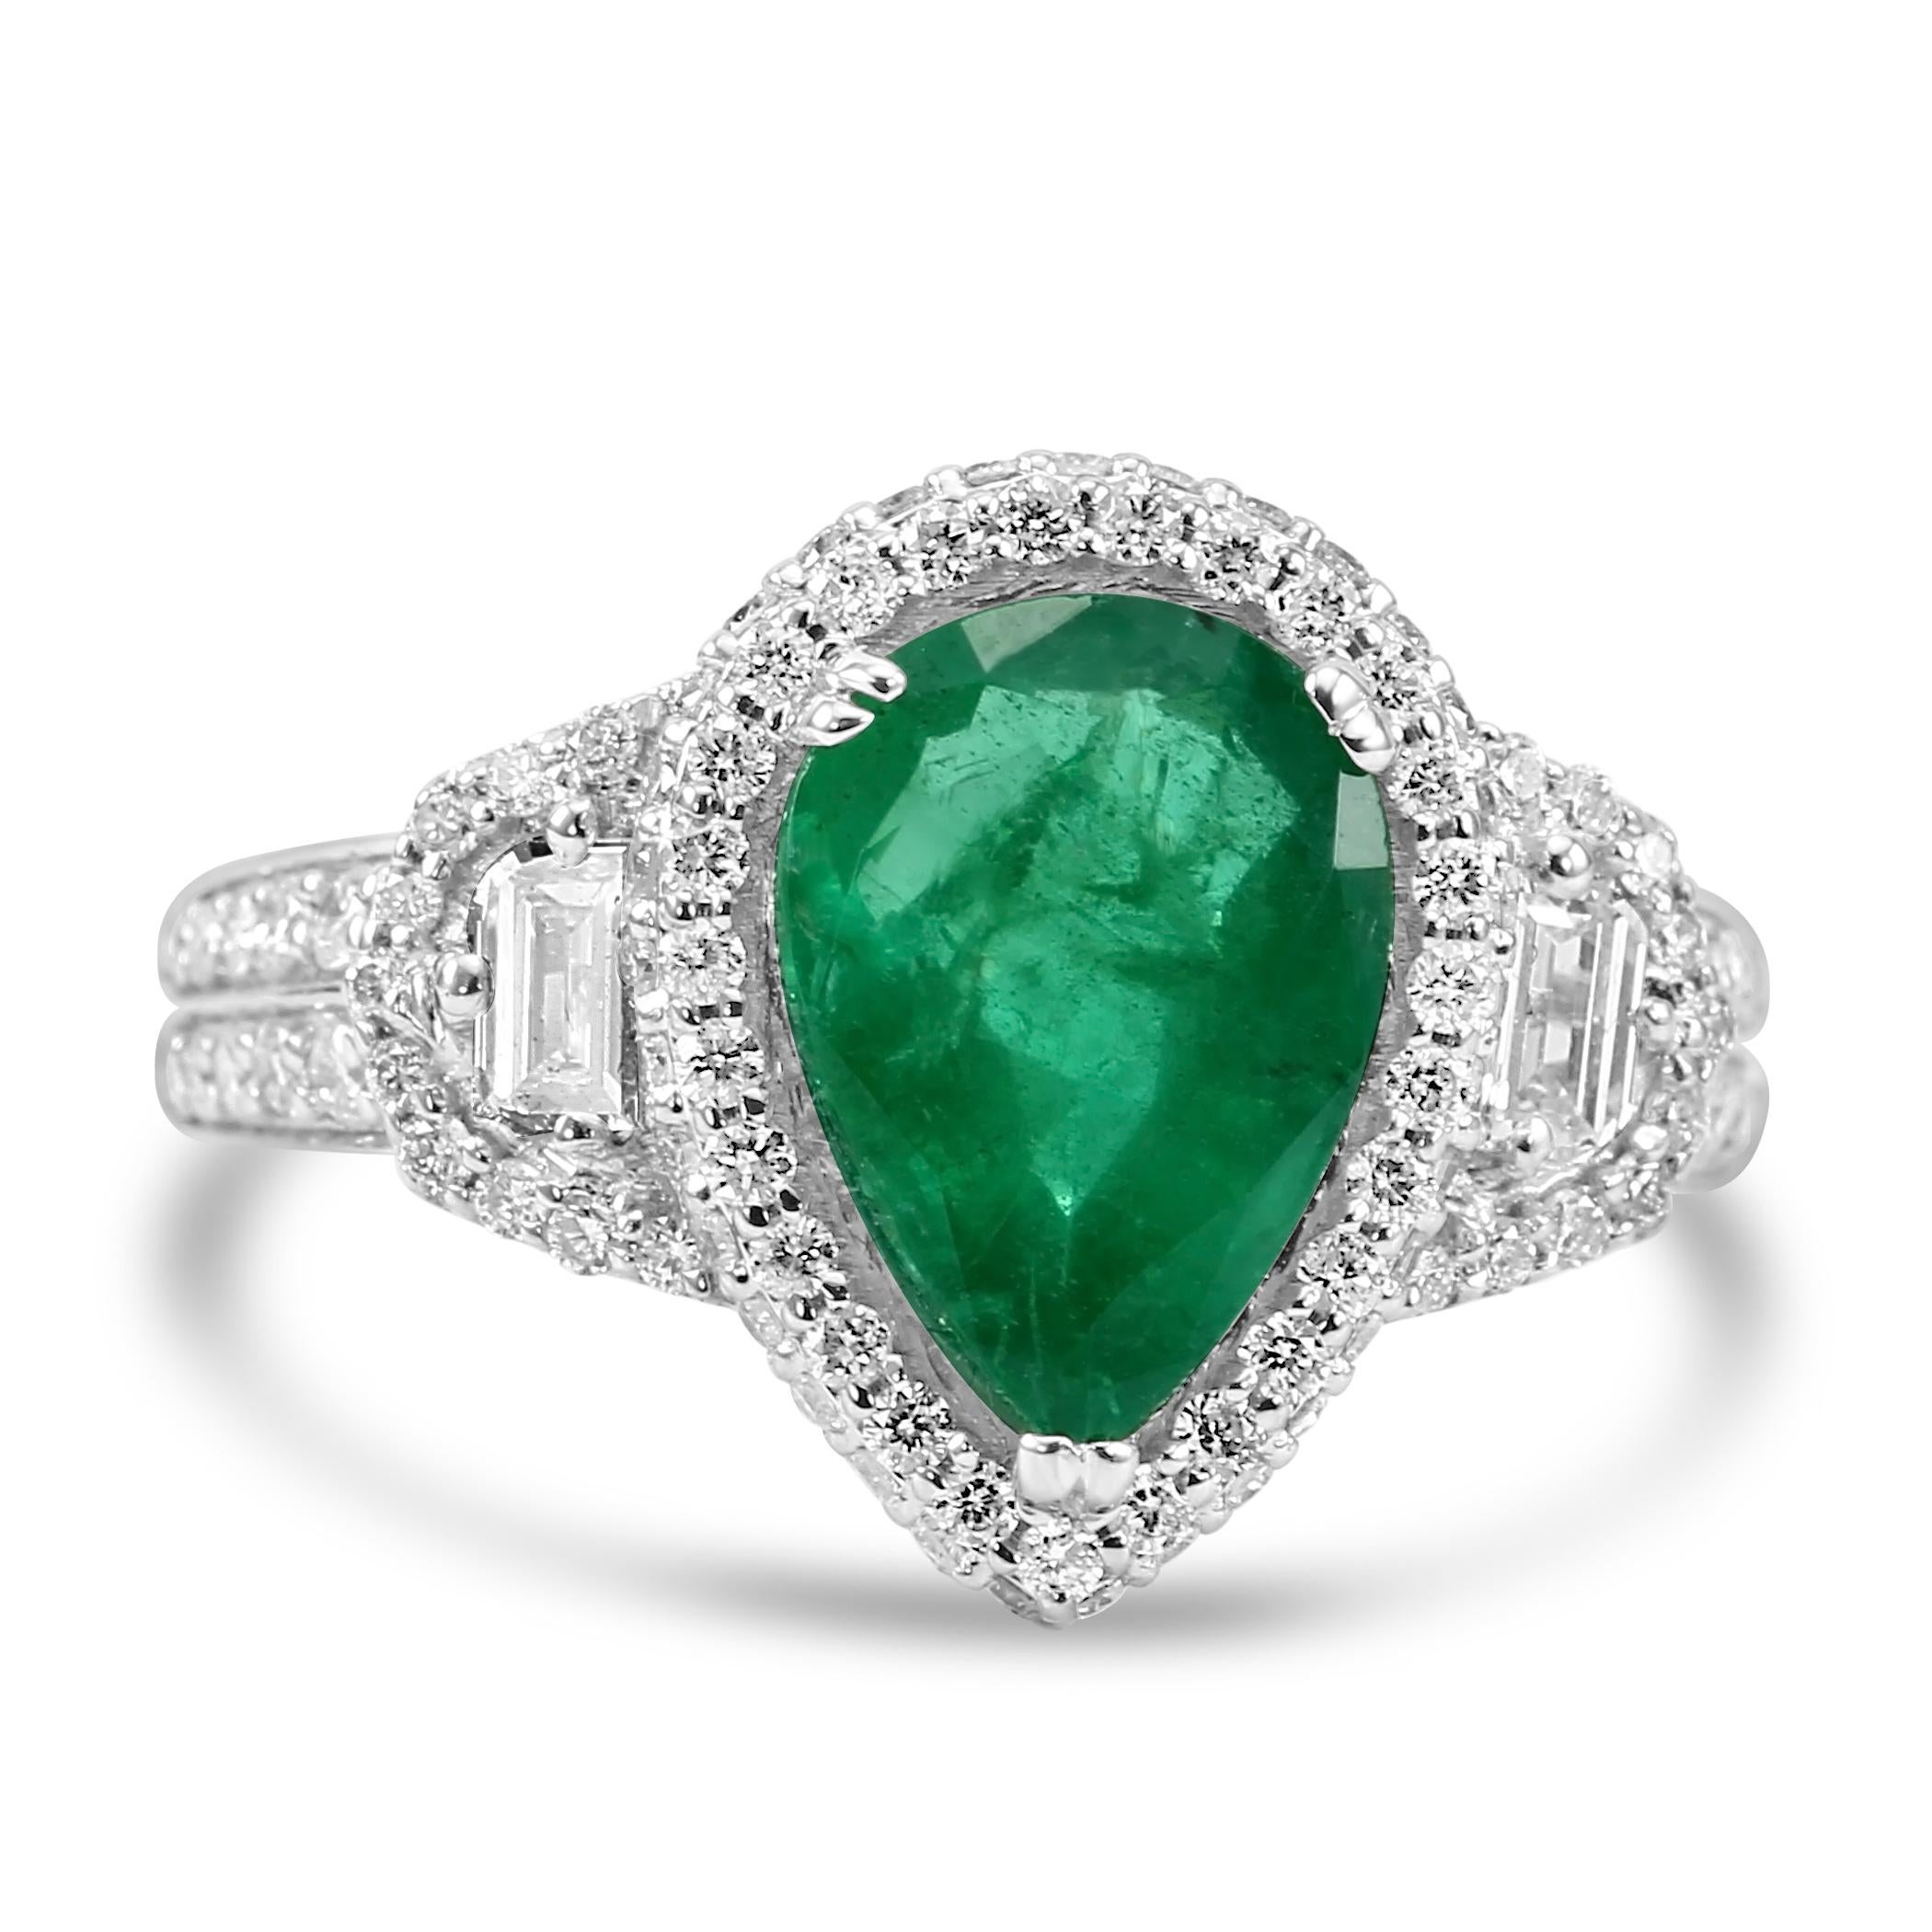 Behold the epitome of timeless elegance with our Pear shaped Emerald ring, featuring a breathtaking Pear-Shaped Emerald at the center, weighing an impressive 2.38 carats. This mesmerizing gem is flanked by two Pear-Shaped White Diamonds, totaling